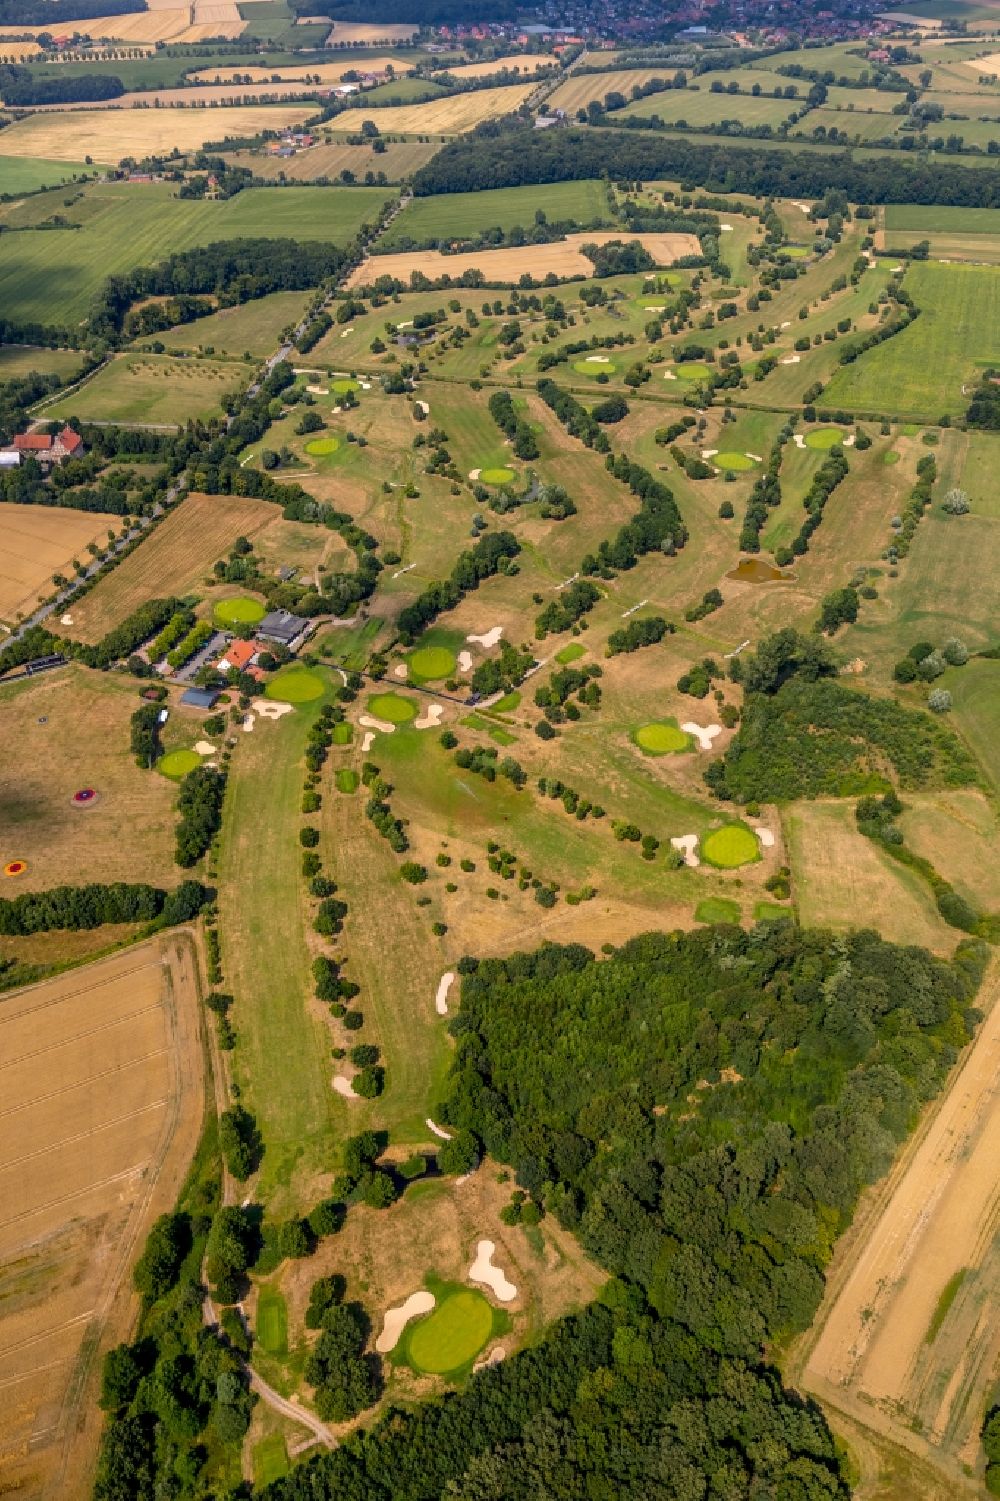 Everswinkel from above - Grounds of the Golf course at Golfclub Brueckhausen in Everswinkel in the state North Rhine-Westphalia, Germany